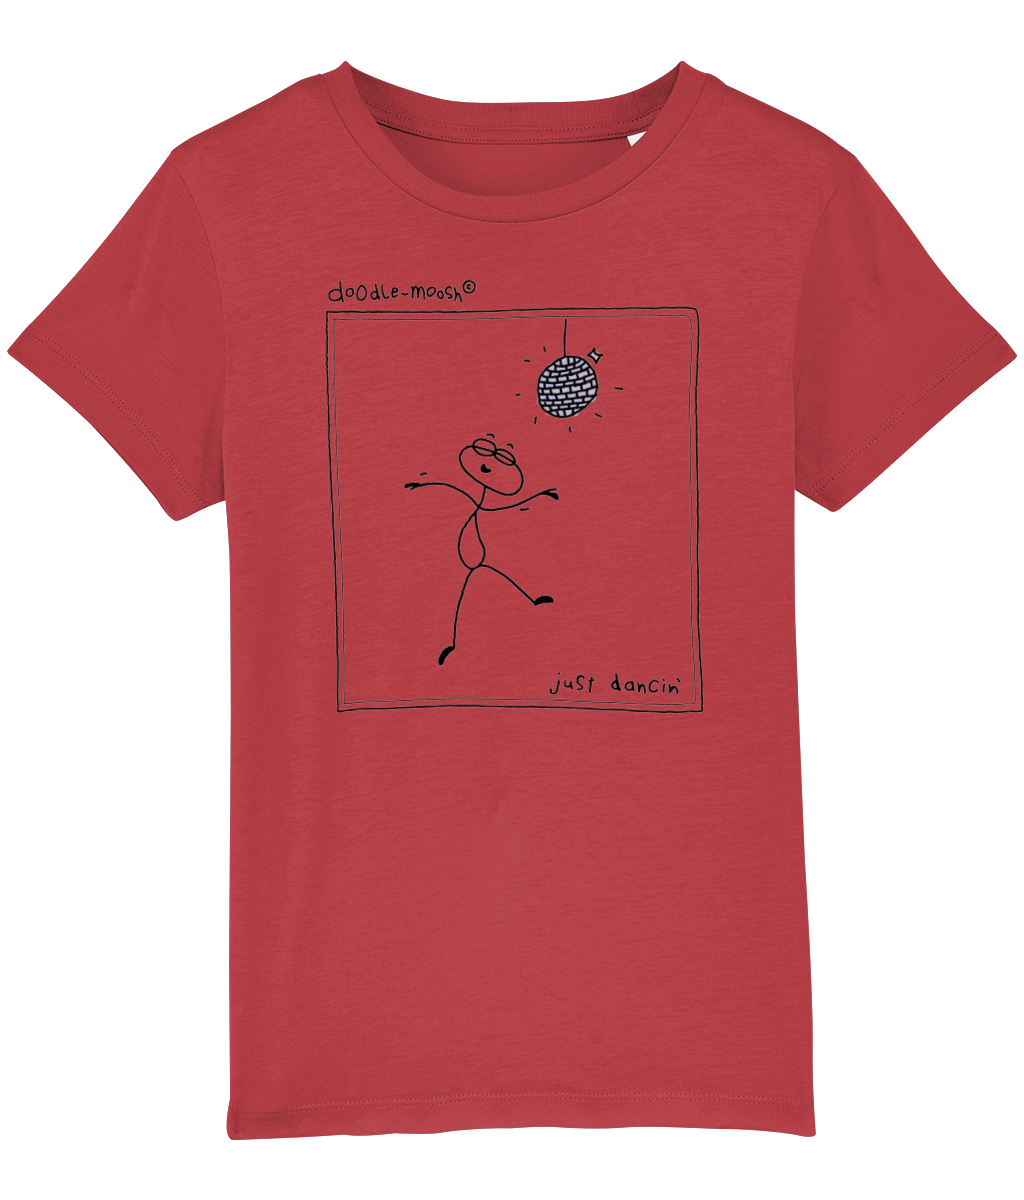 Just dancing t-shirt, red with black, colorful drawing